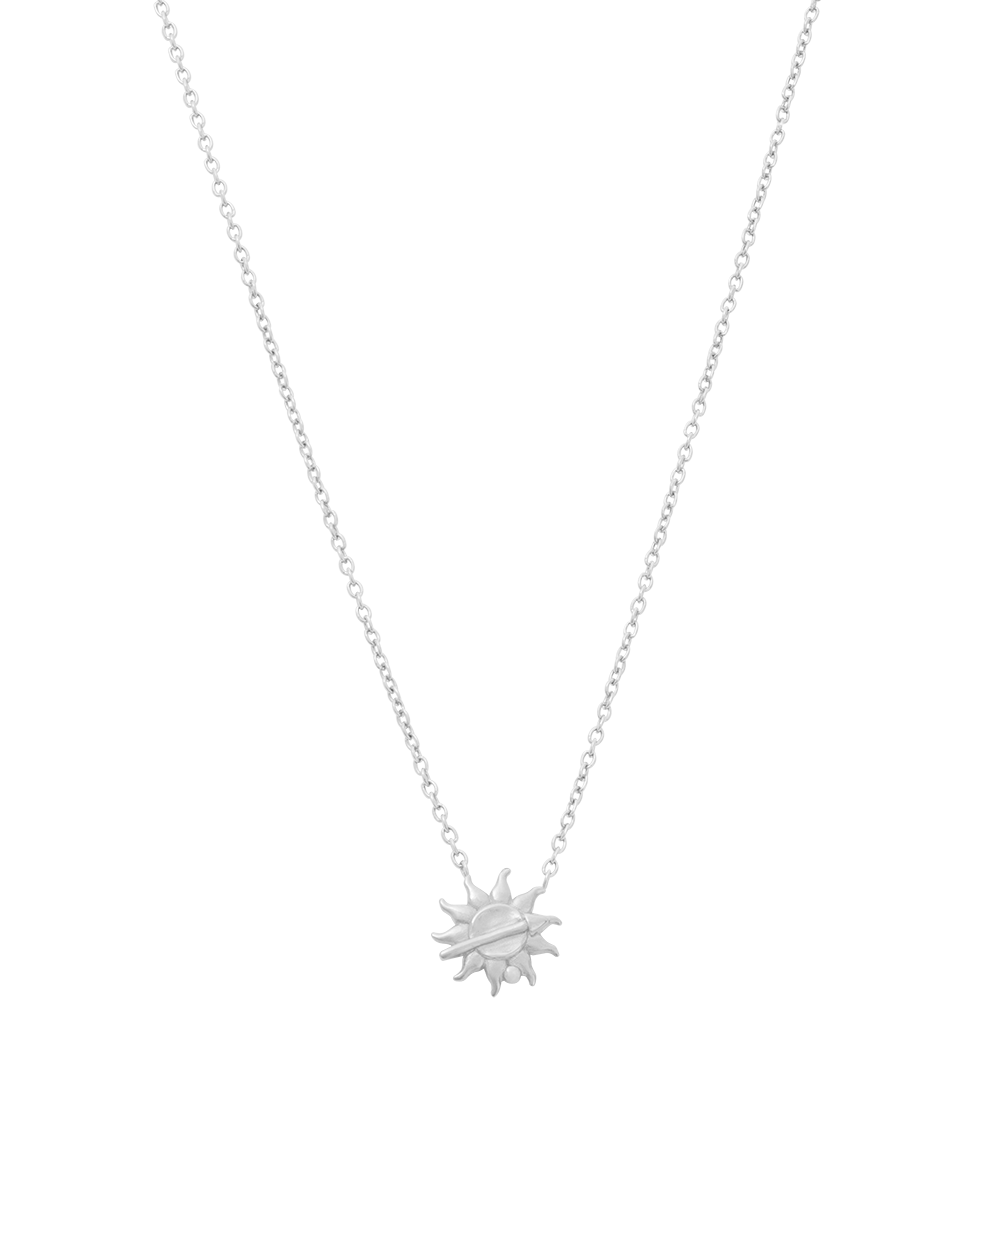 SAGITTARIUS STAR SIGN NECKLACE (STERLING SILVER)